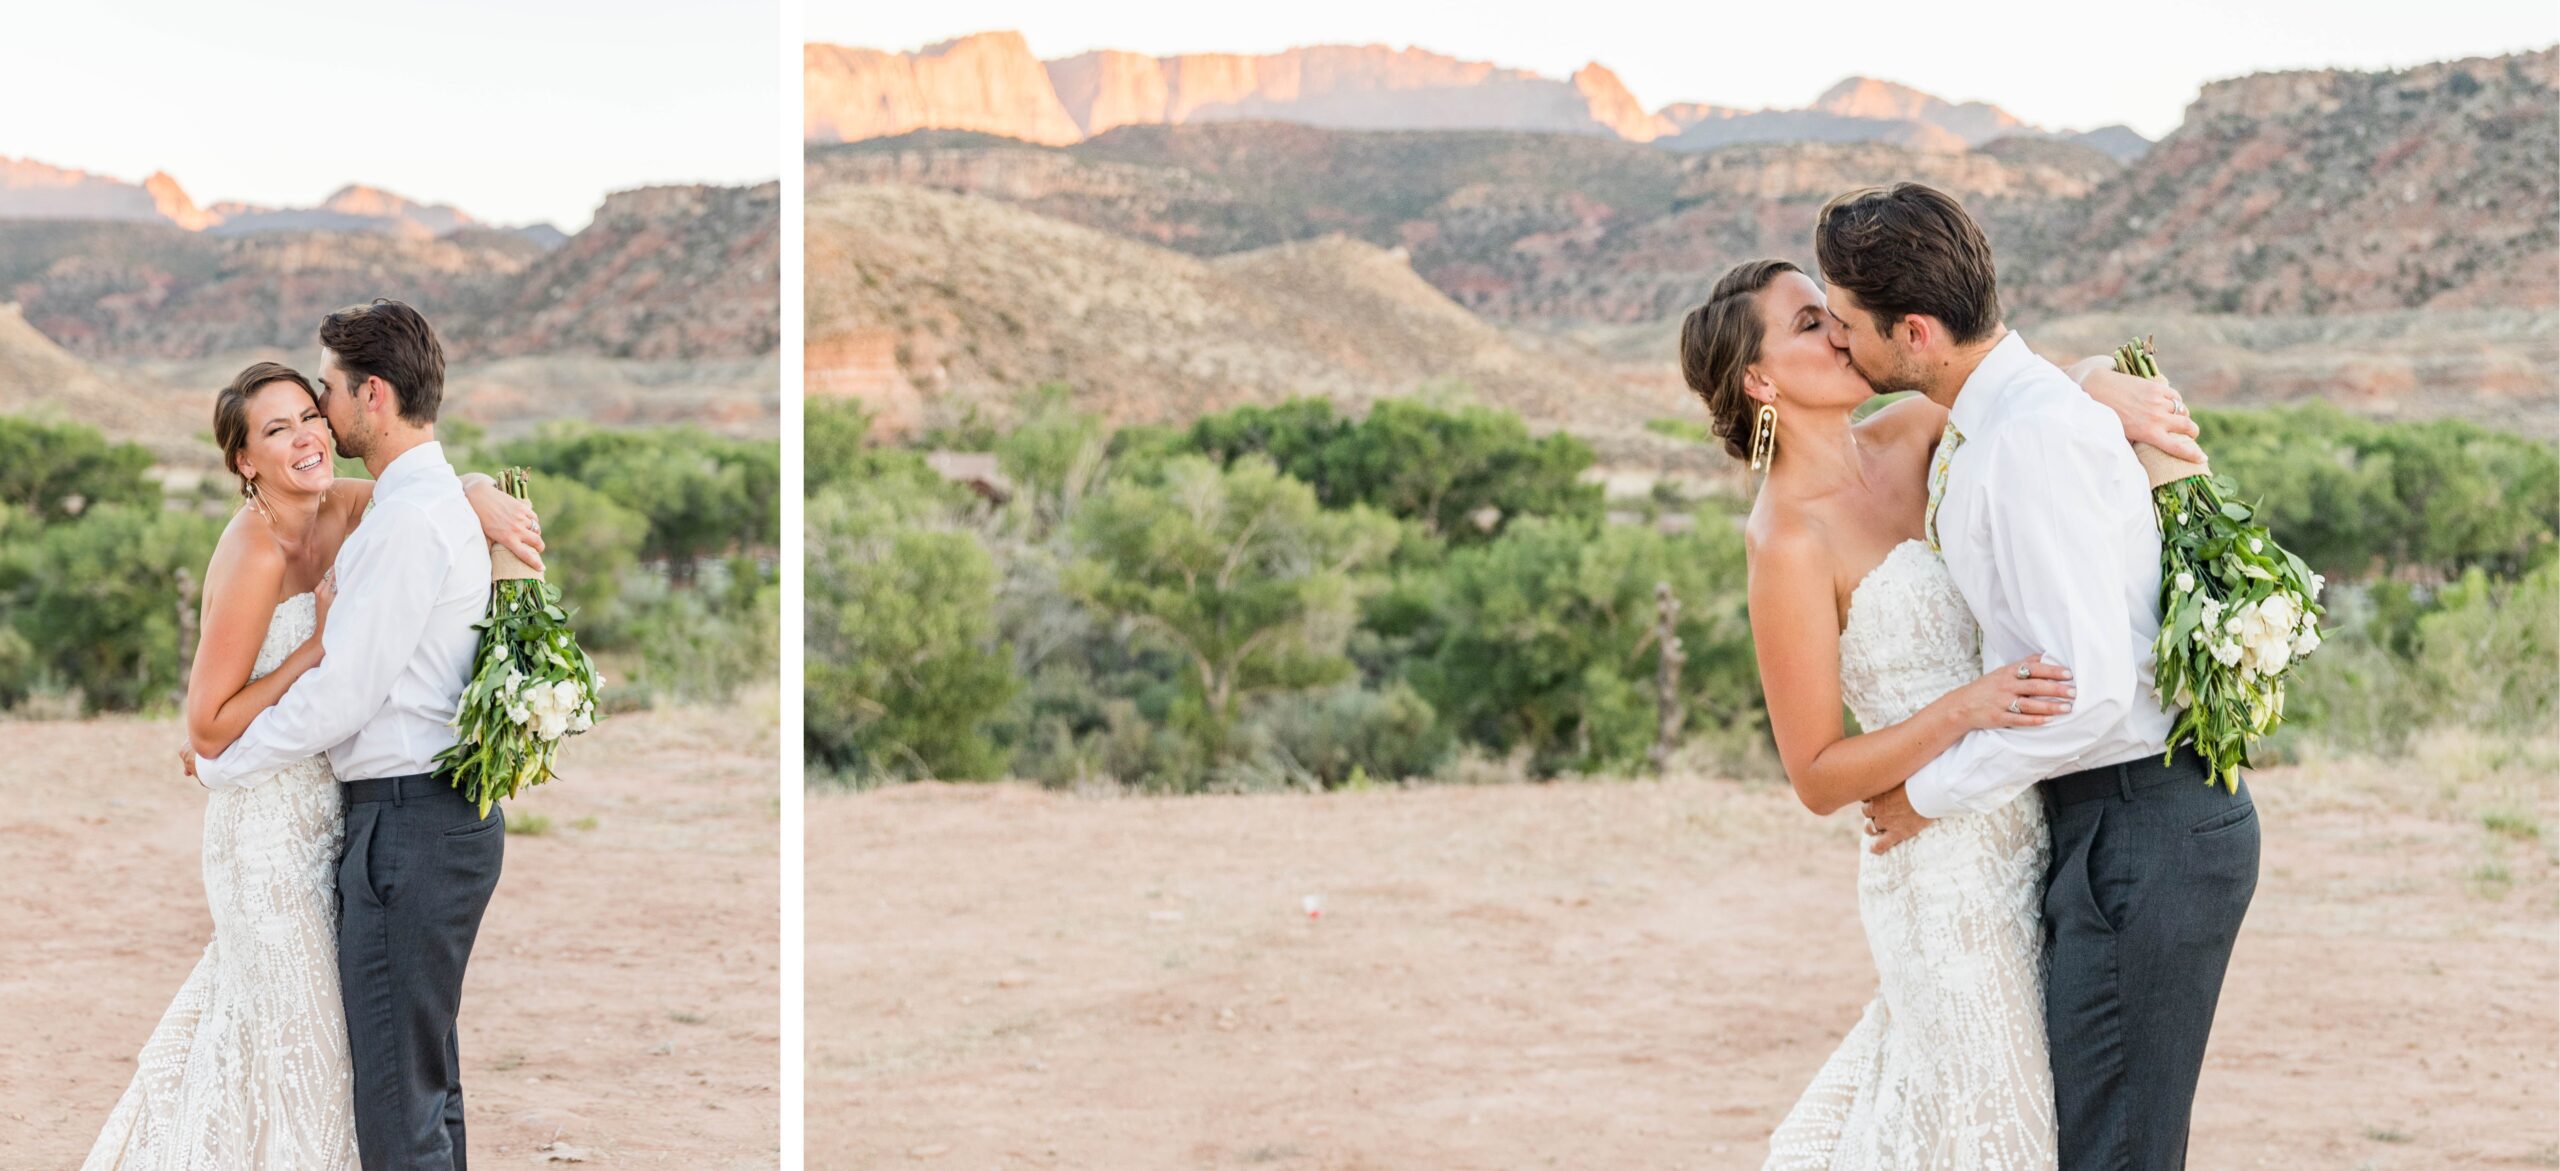 bride and groom getting married at zion national park